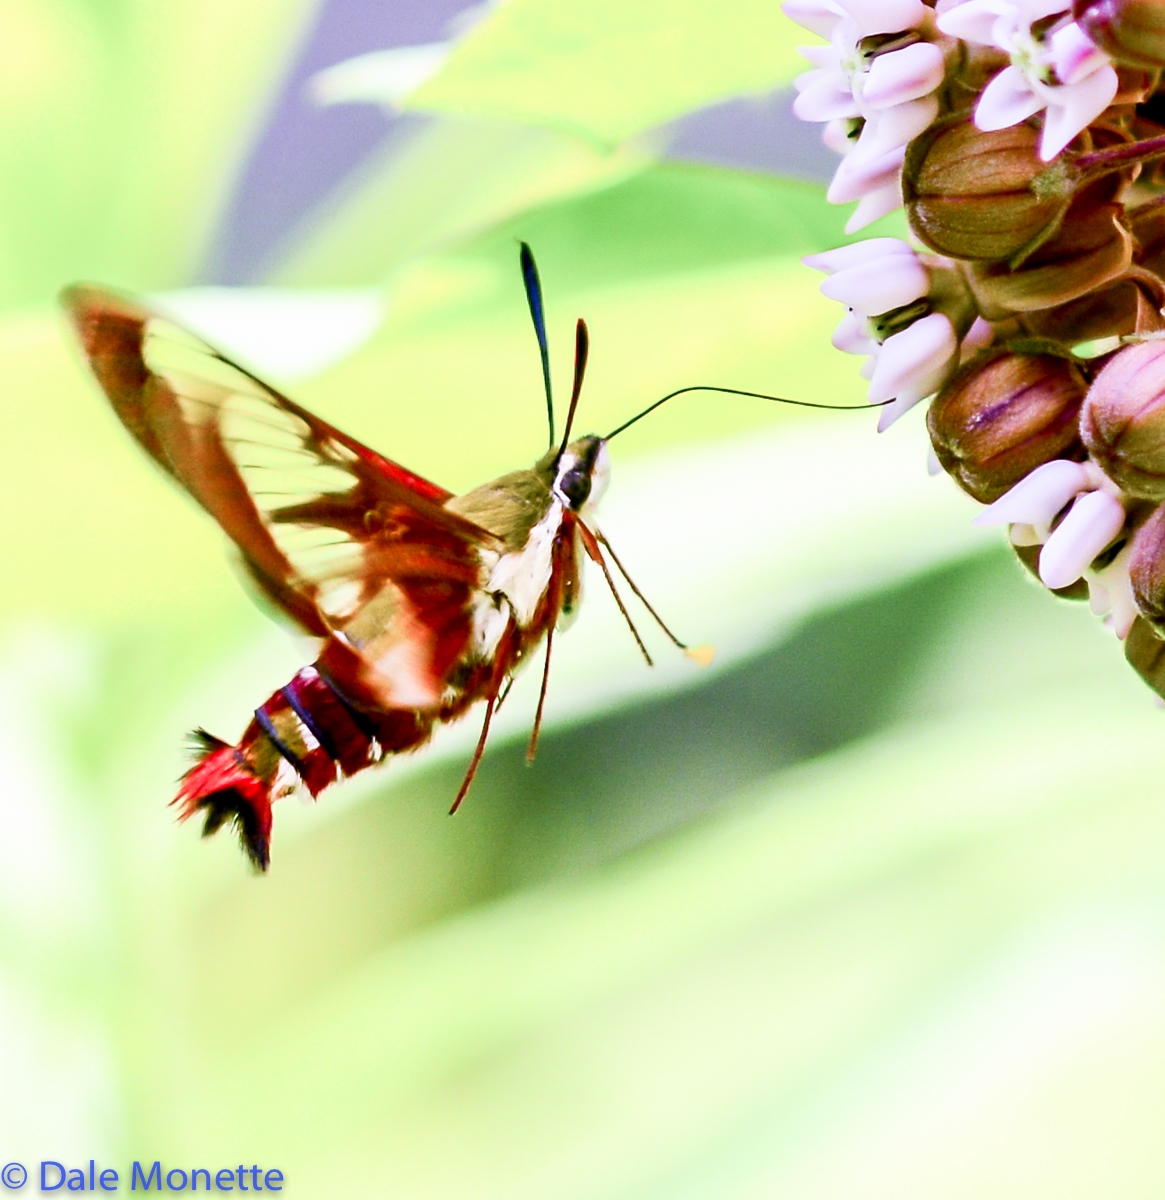 Hummingbird moths sometimes fool people into thinking they are watching a hummingbird with their rapid wing beats.